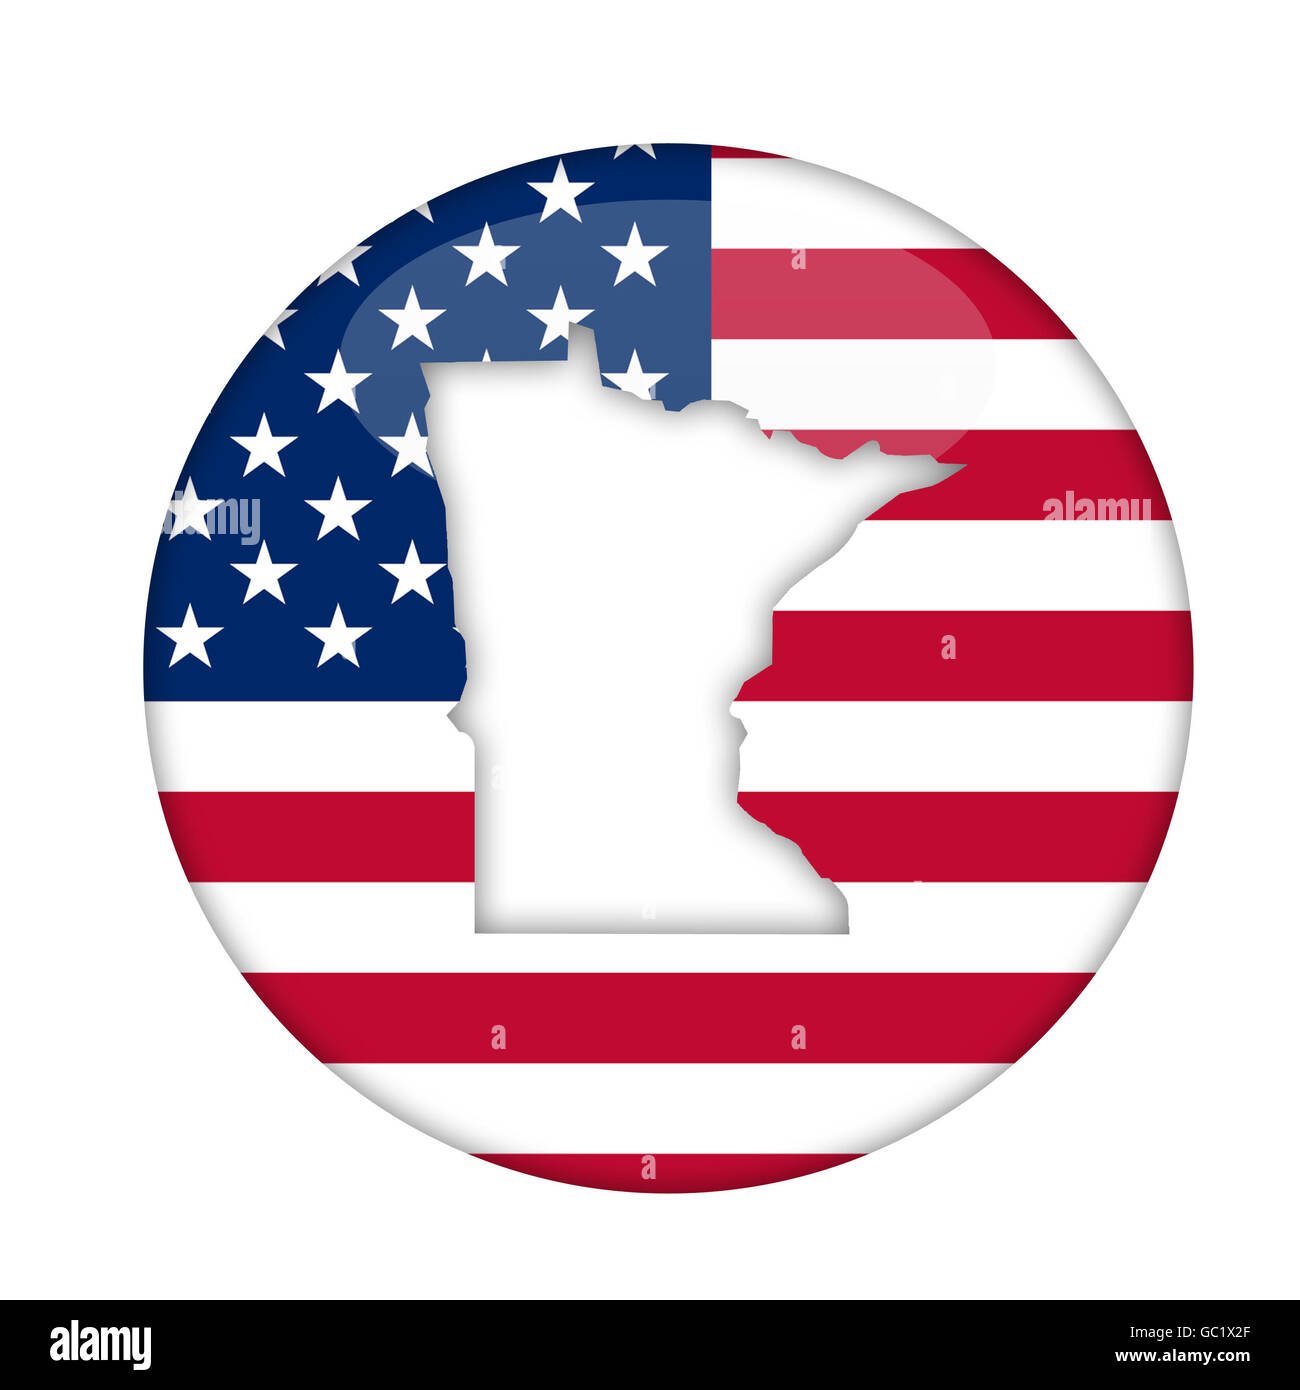 Minnesota state of America badge isolated on a white background. Stock Photo